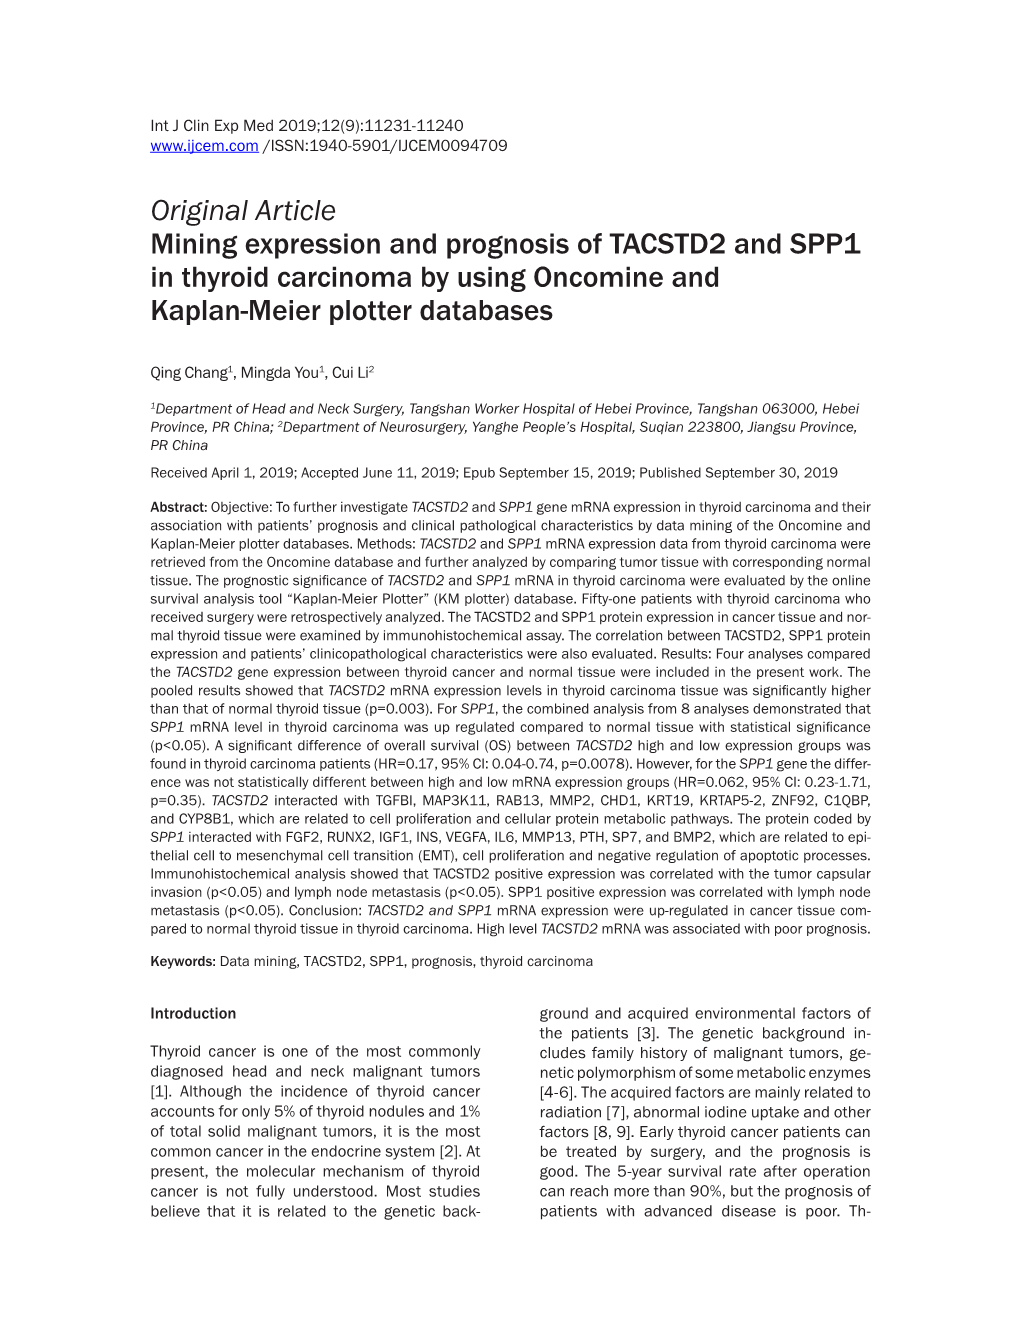 Original Article Mining Expression and Prognosis of TACSTD2 and SPP1 in Thyroid Carcinoma by Using Oncomine and Kaplan-Meier Plotter Databases